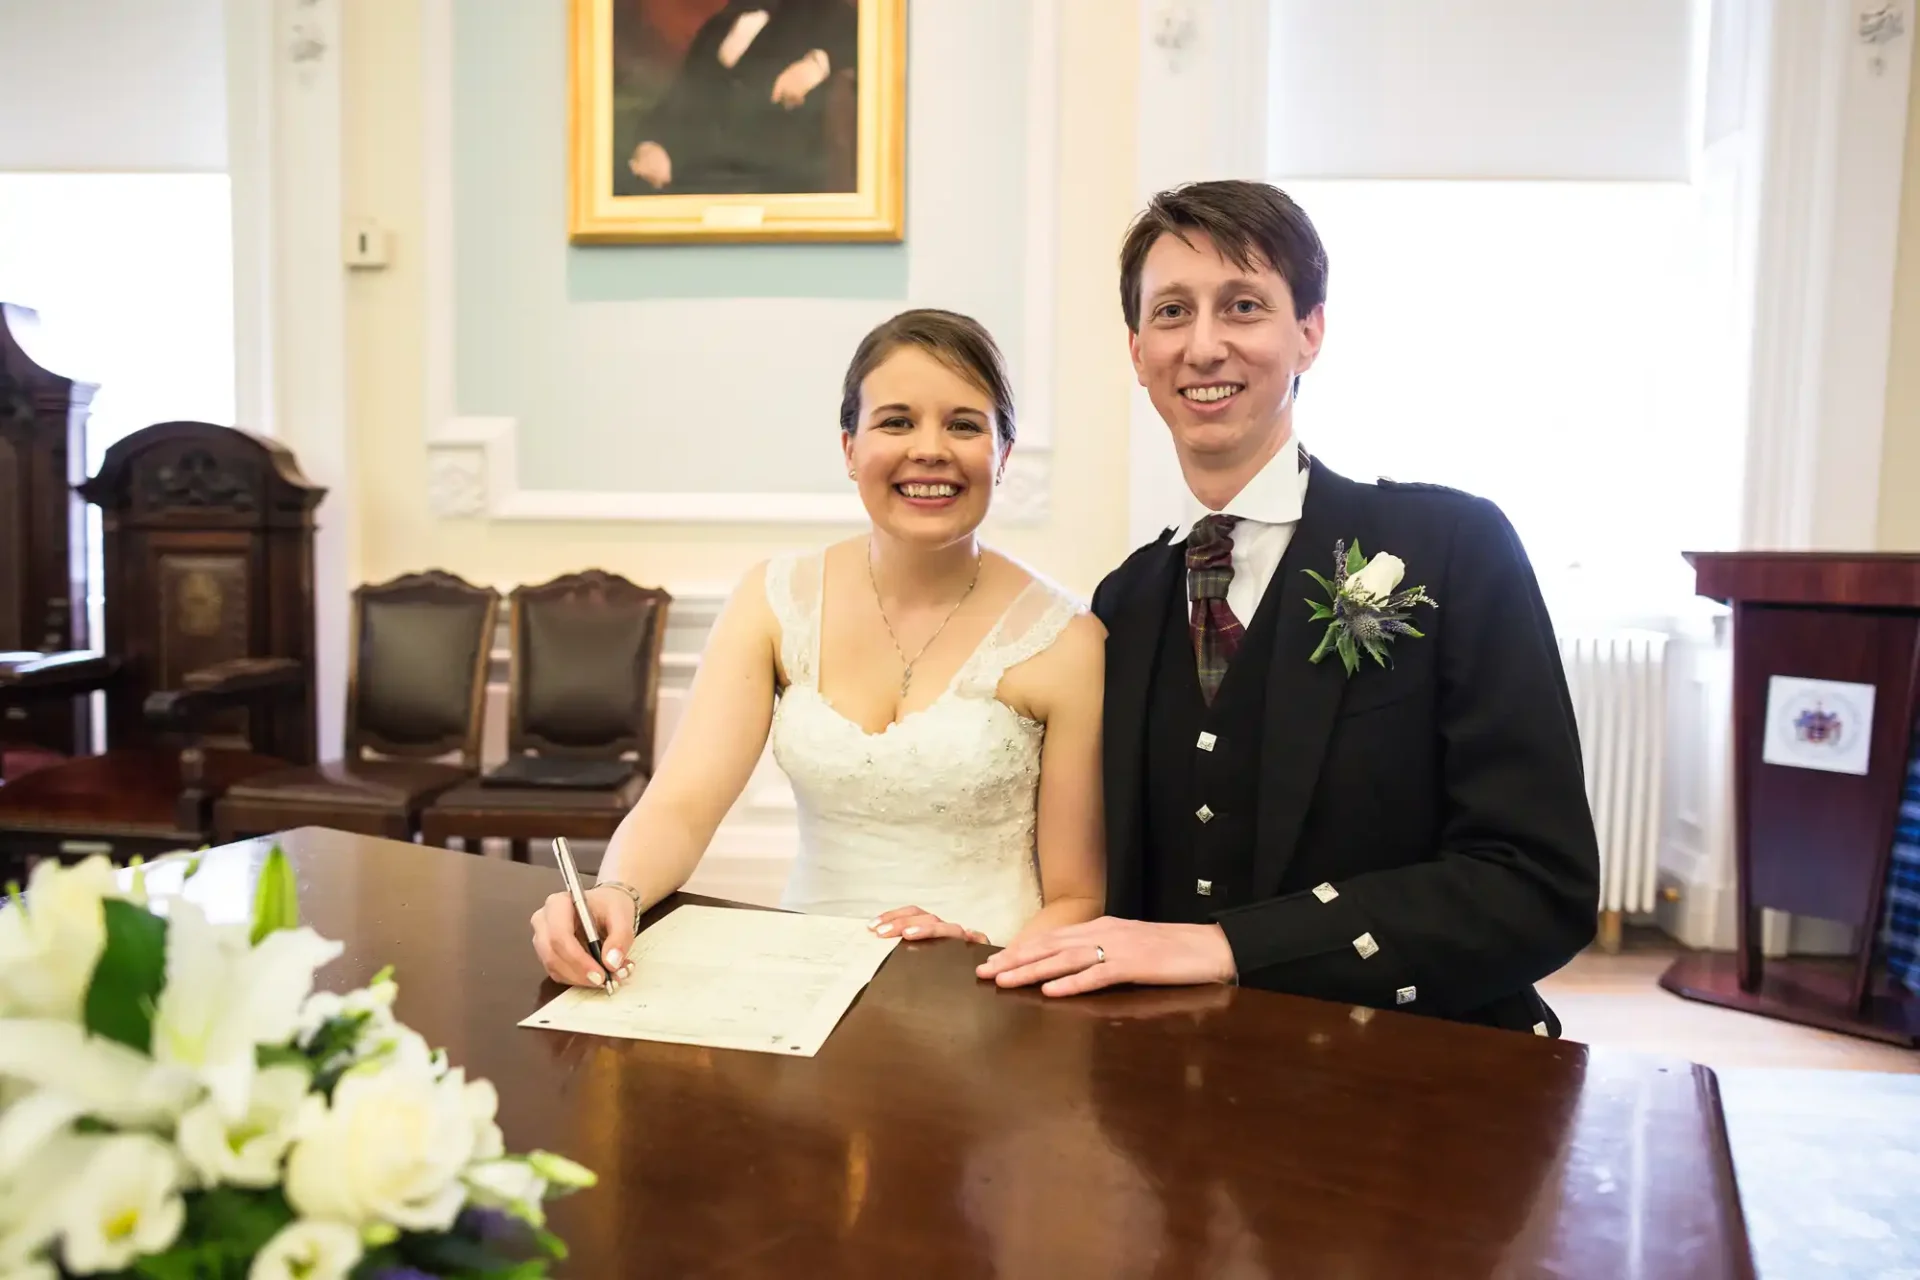 A smiling bride and groom signing a marriage certificate at a table in an elegant room with paintings and antique furniture.